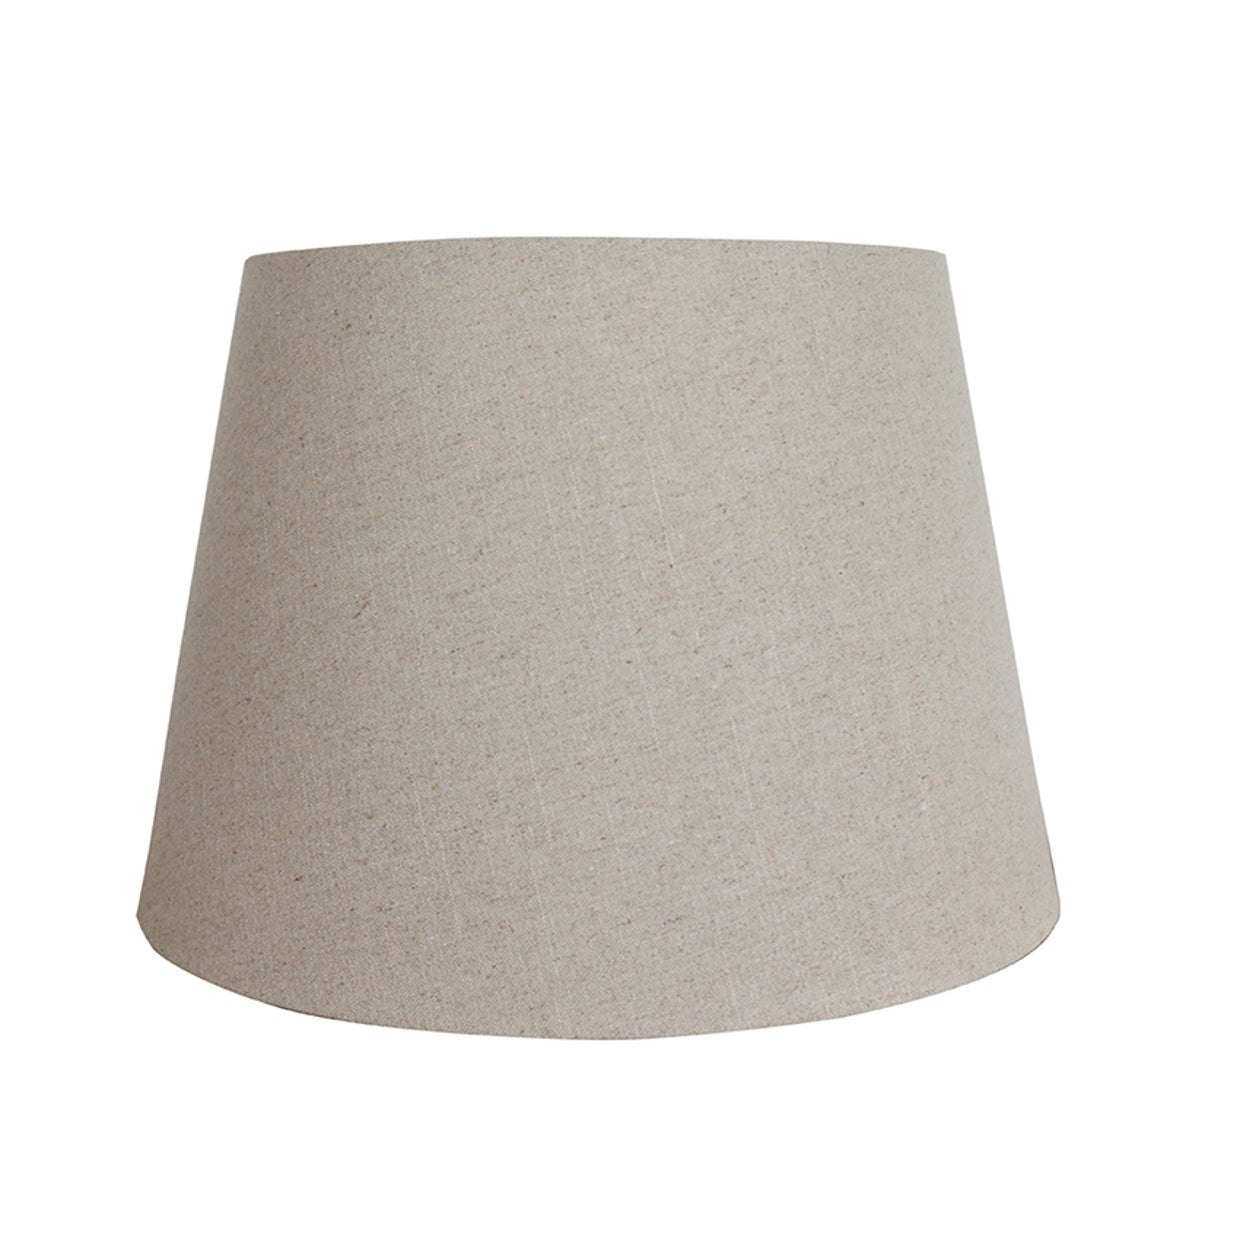 Raw Linen Tall Drum 46cm Lampshade